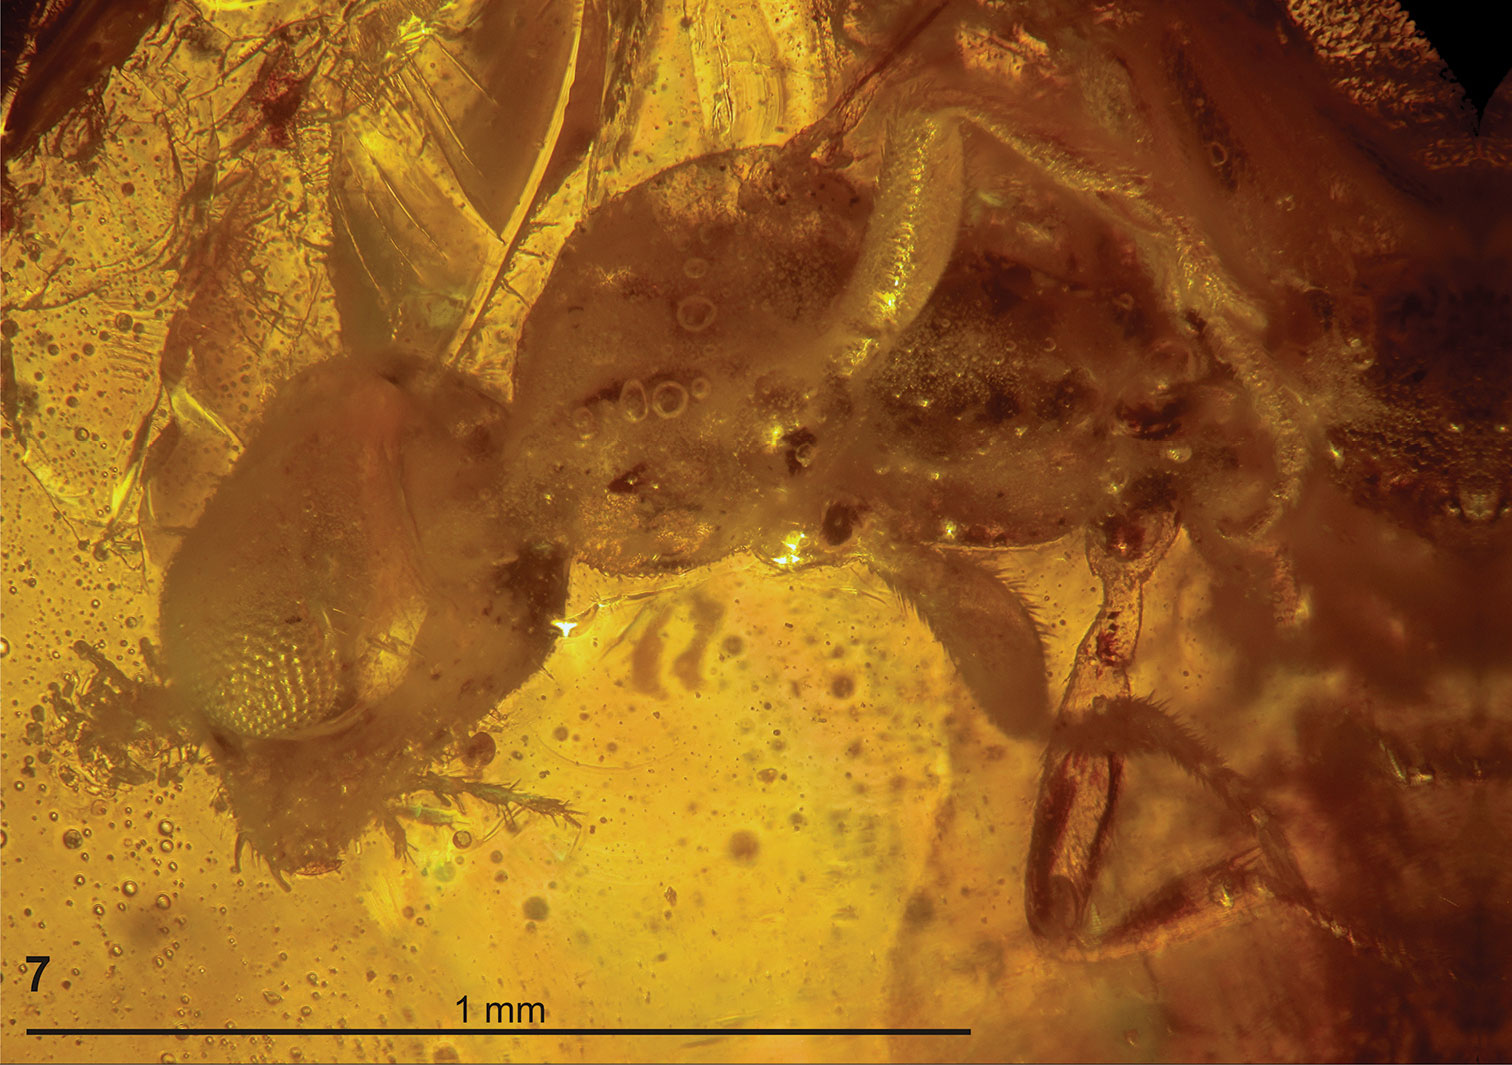 Photograph of a fossil wasp preserved in amber. The photo shows the front part of an insect trapped in translucent yellow-orange amber.